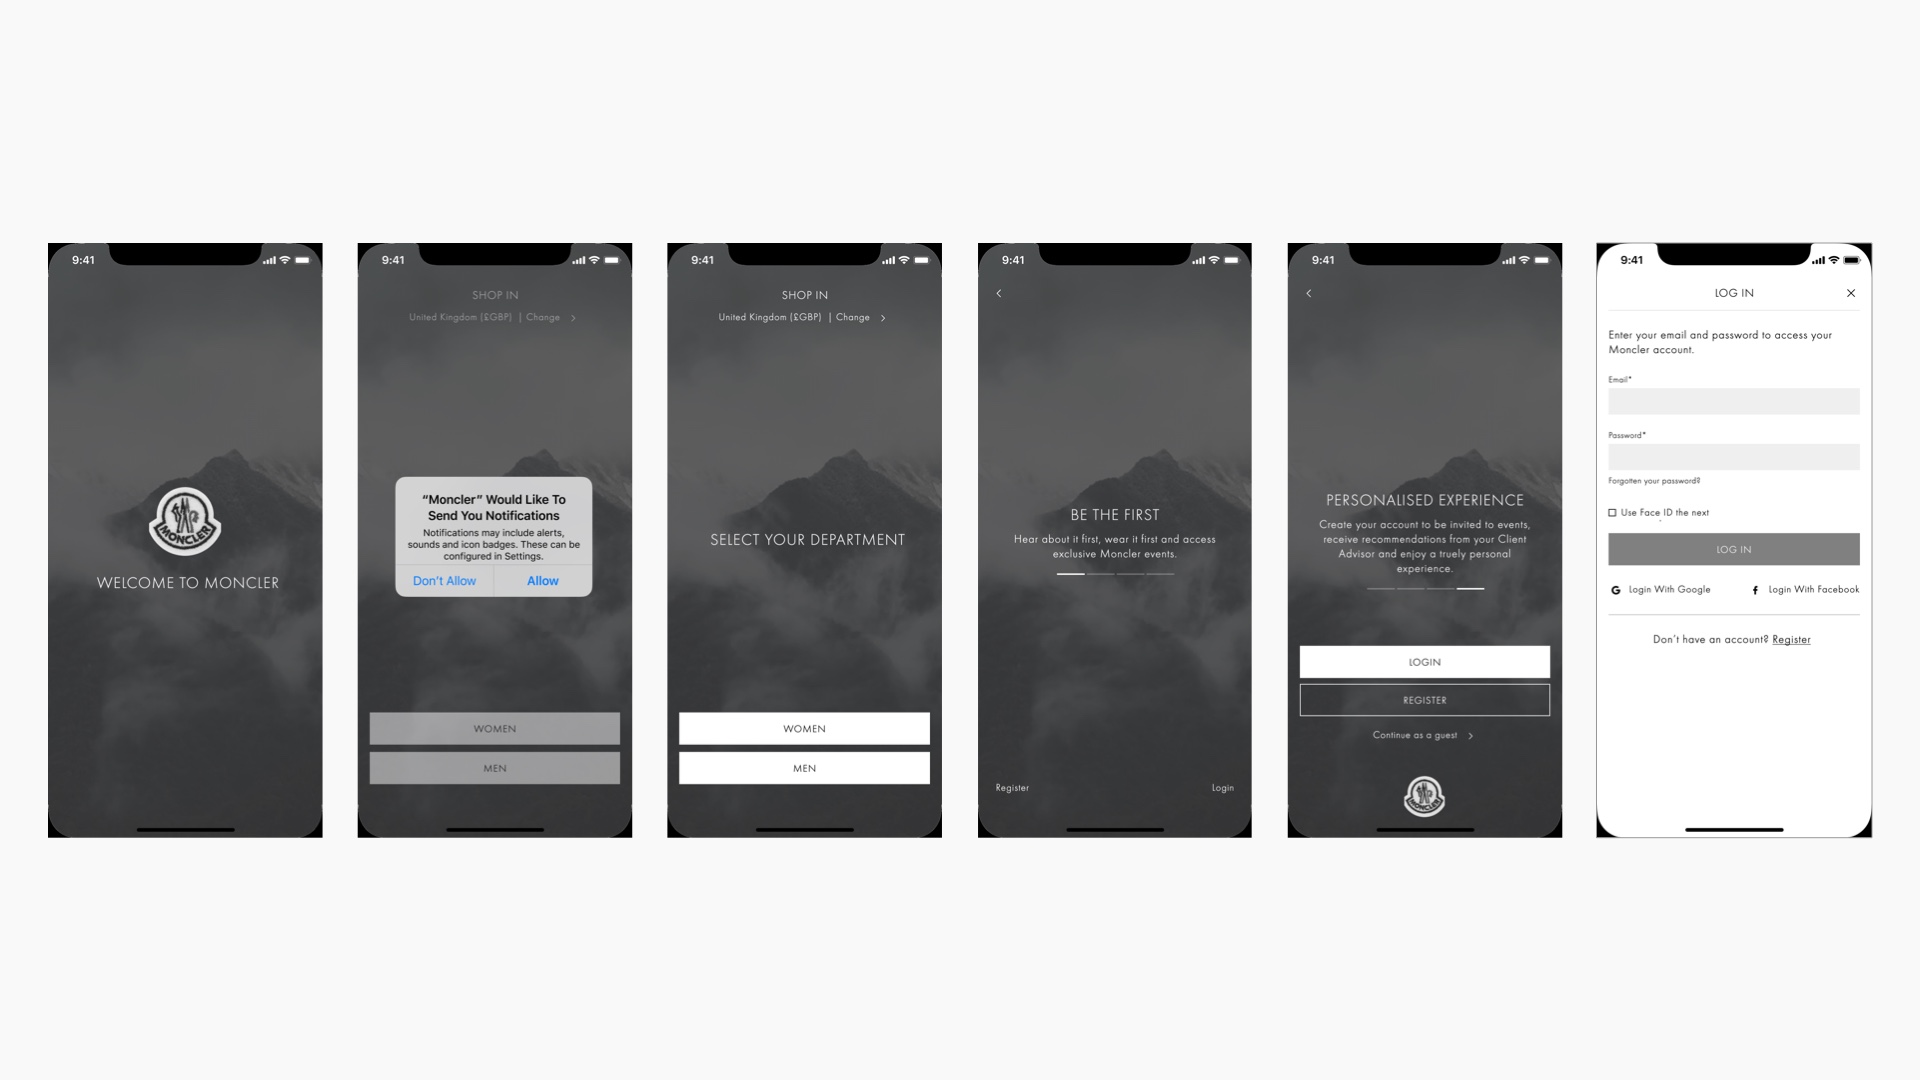 A series of wireframes showing the information structure and user interactions on the onboarding page